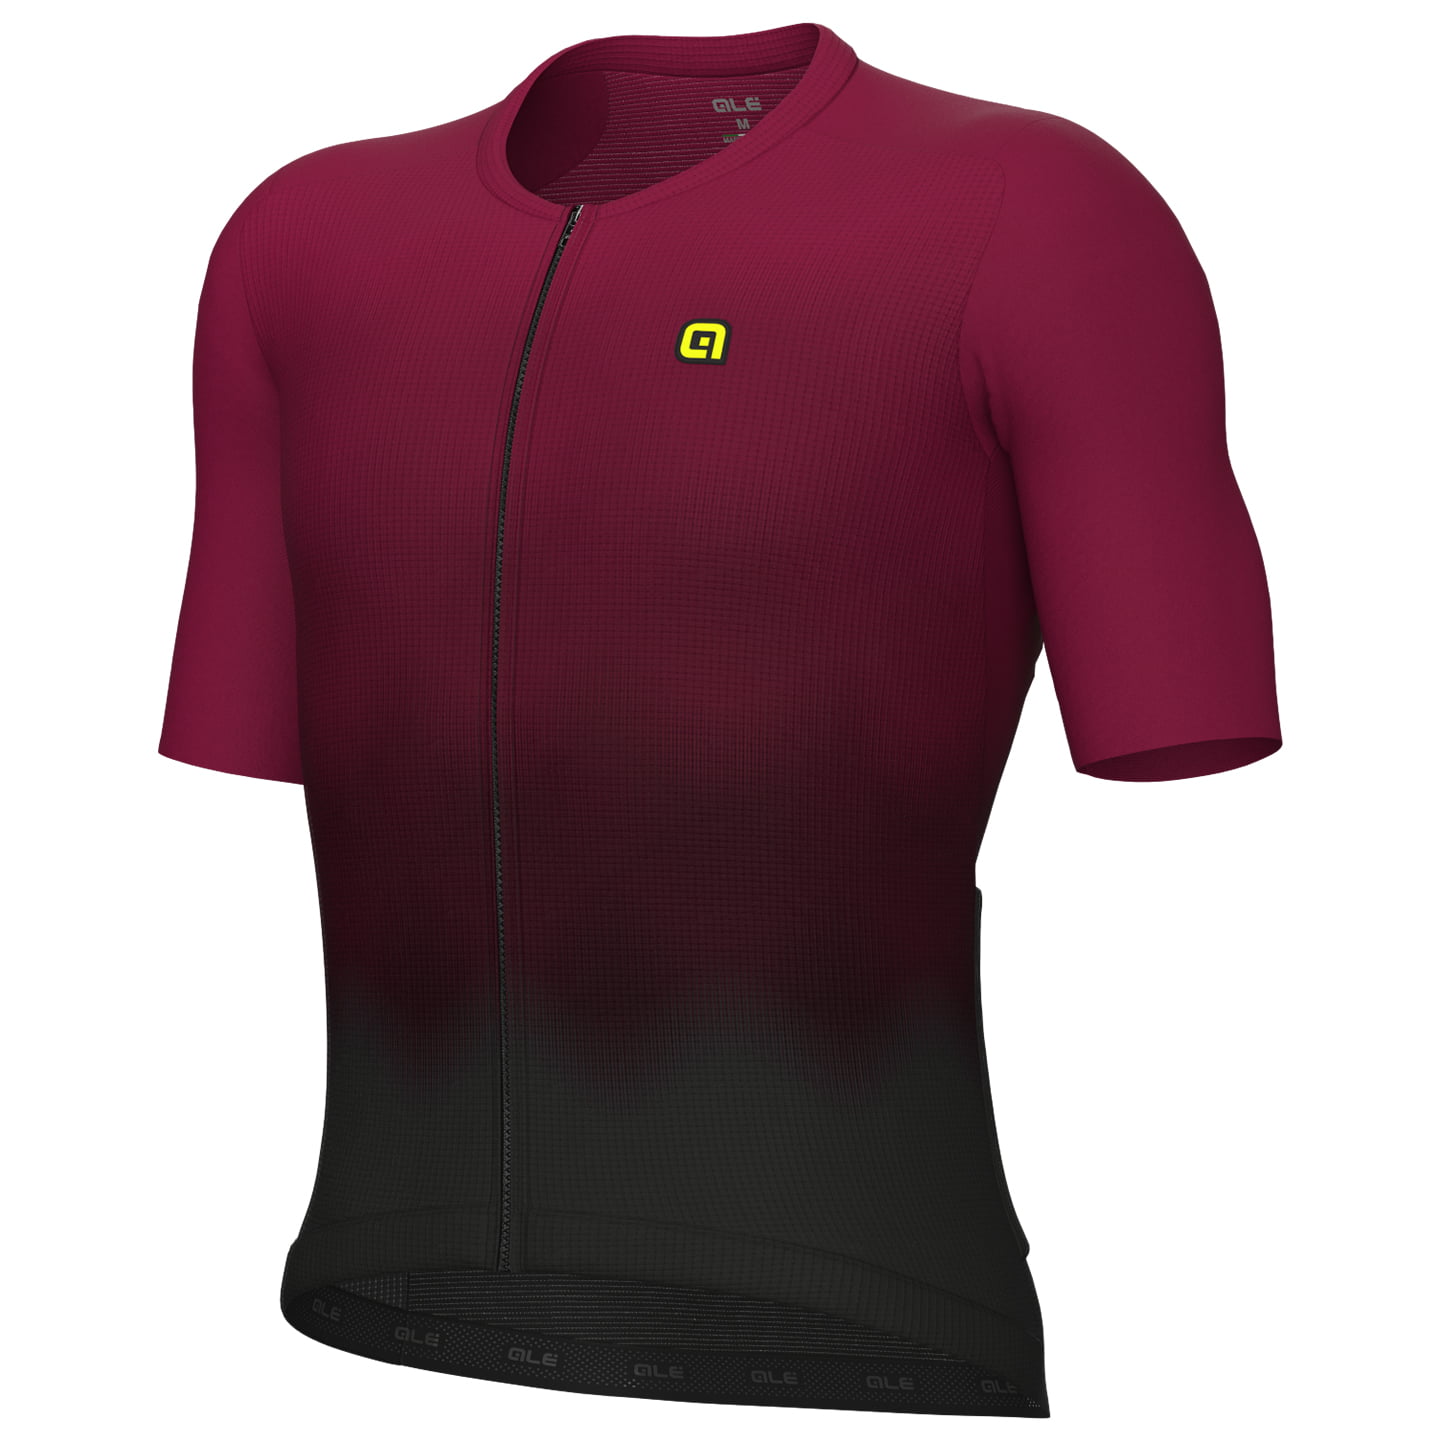 ALE Velocity 2.0 Short Sleeve Jersey, for men, size XL, Cycling jersey, Cycle clothing